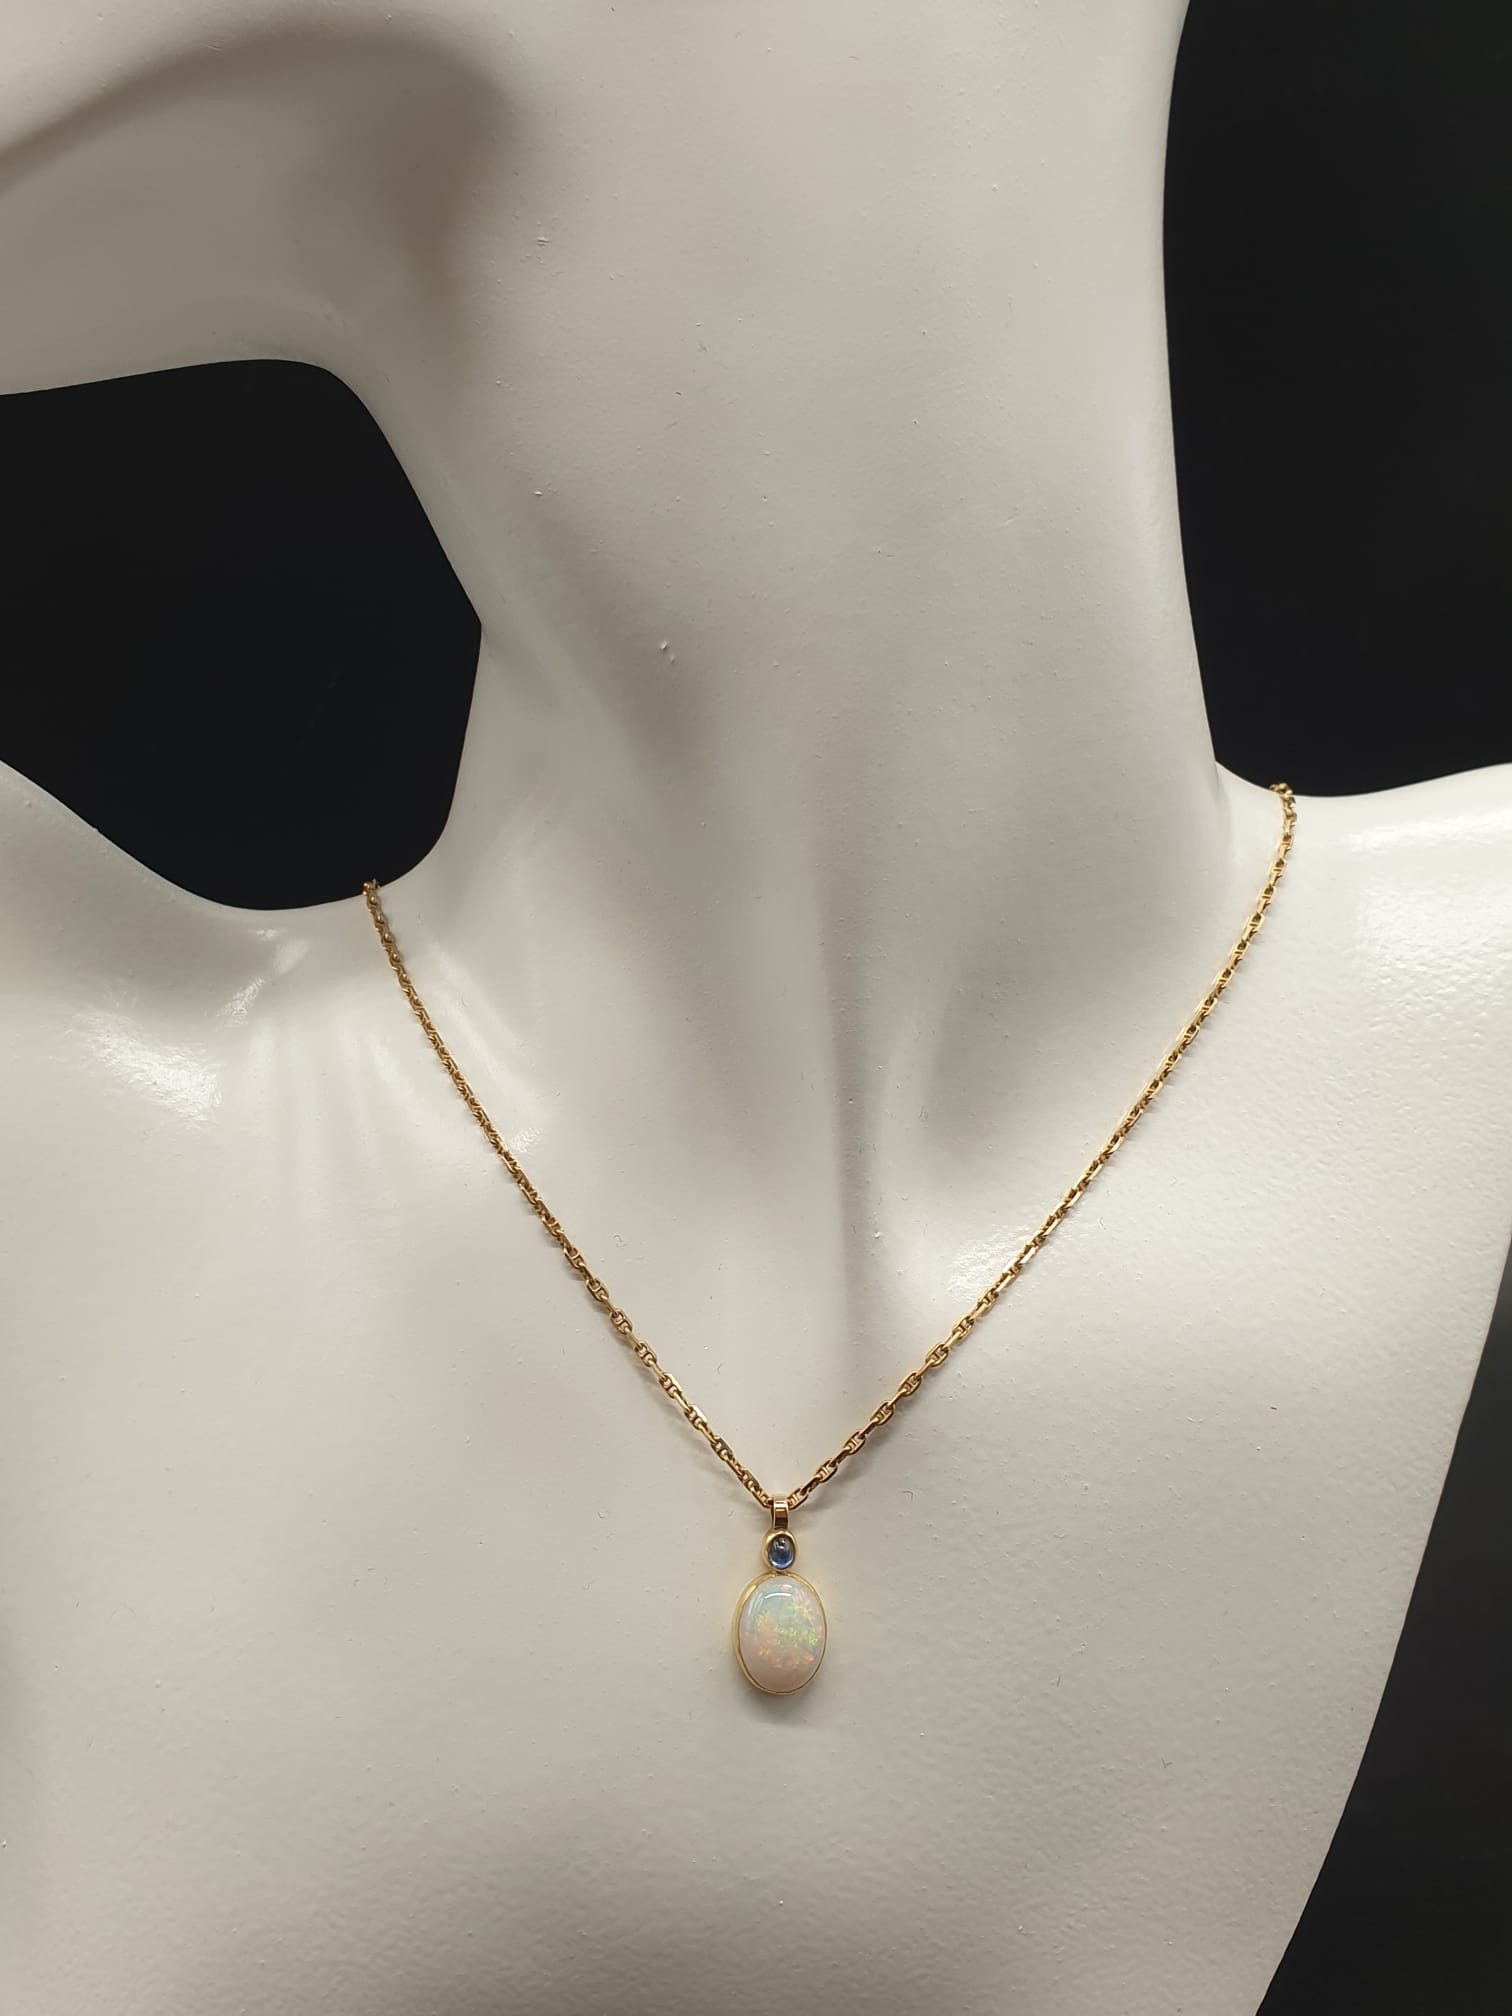 A SAPPHIRE AND OPEL PENDANT ON A 40 cms 9K GOLD CHAIN. - Image 4 of 7